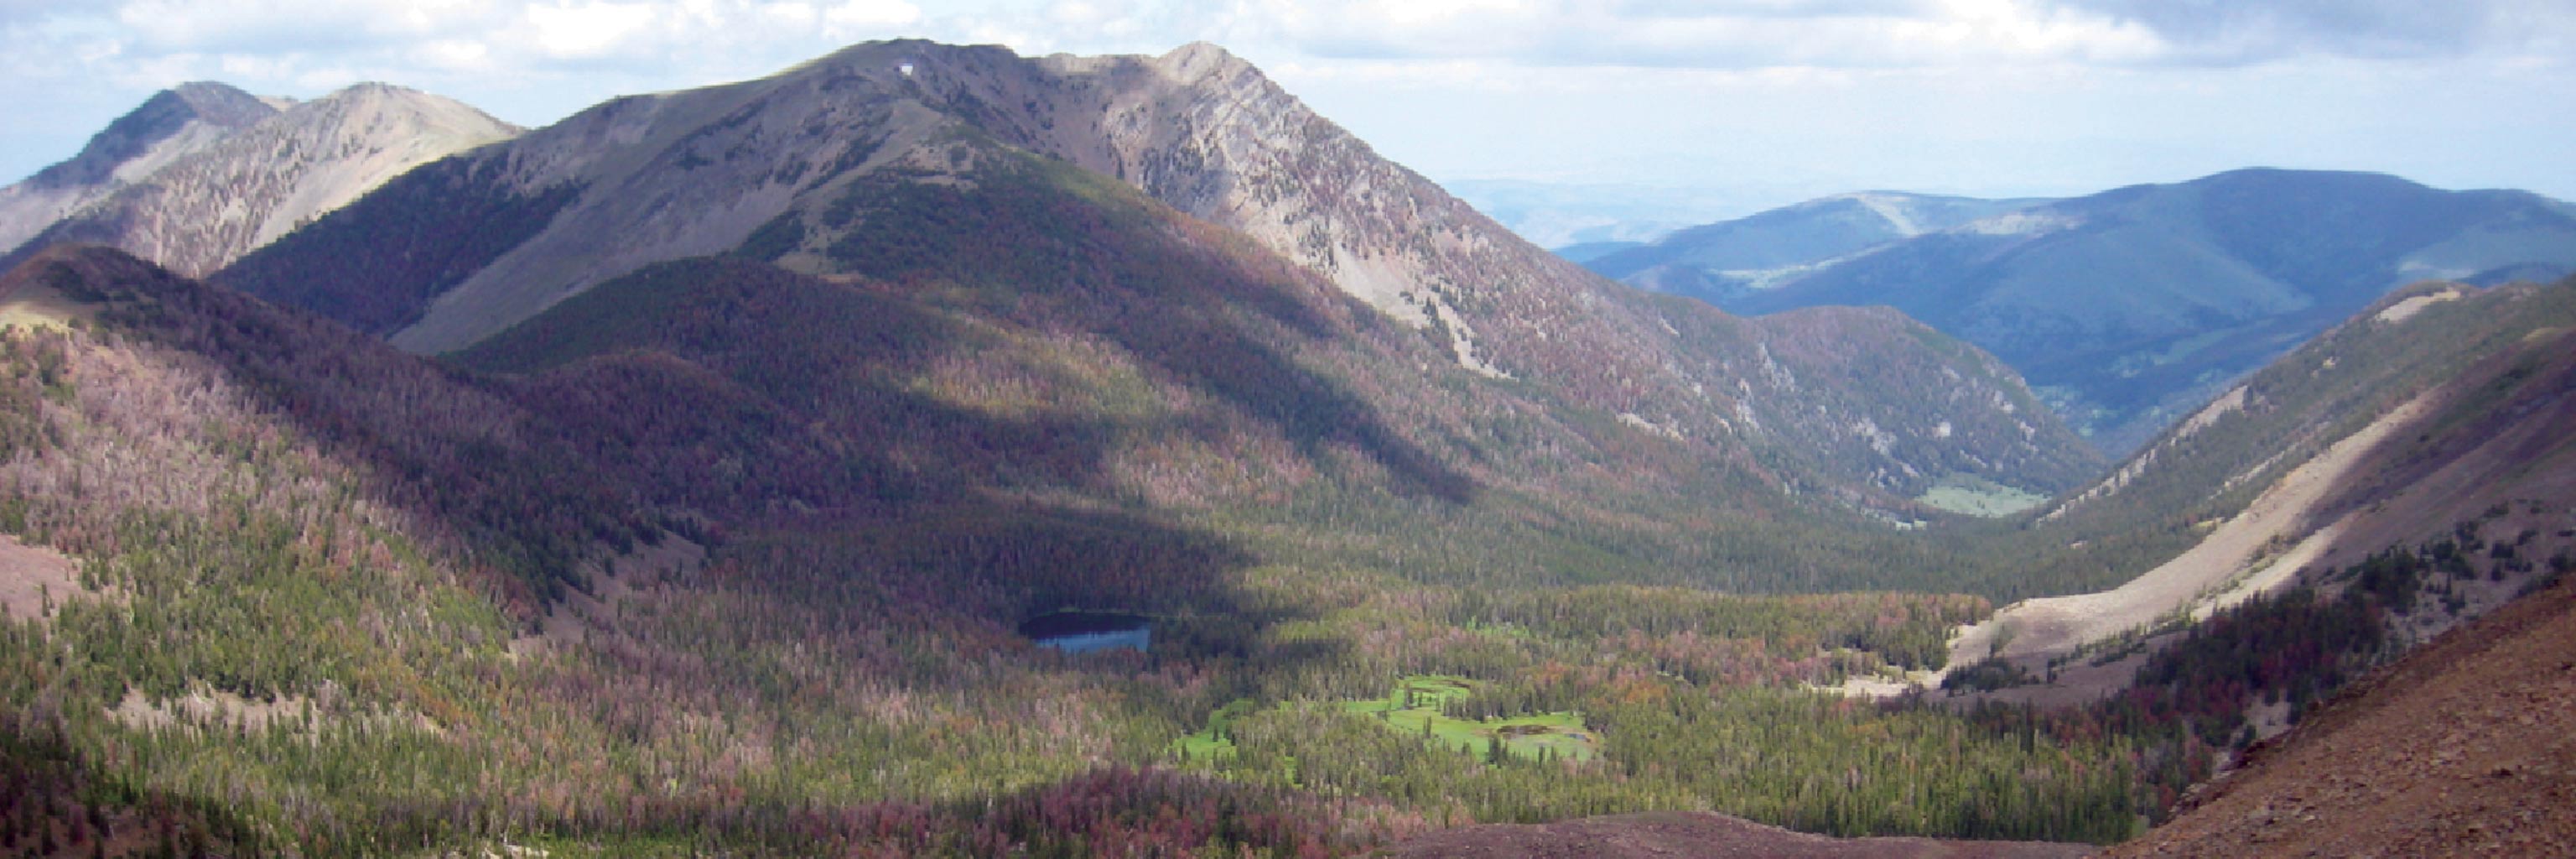 Willow Creek Demonstration Watershed near the Geologic Field Station in Montana